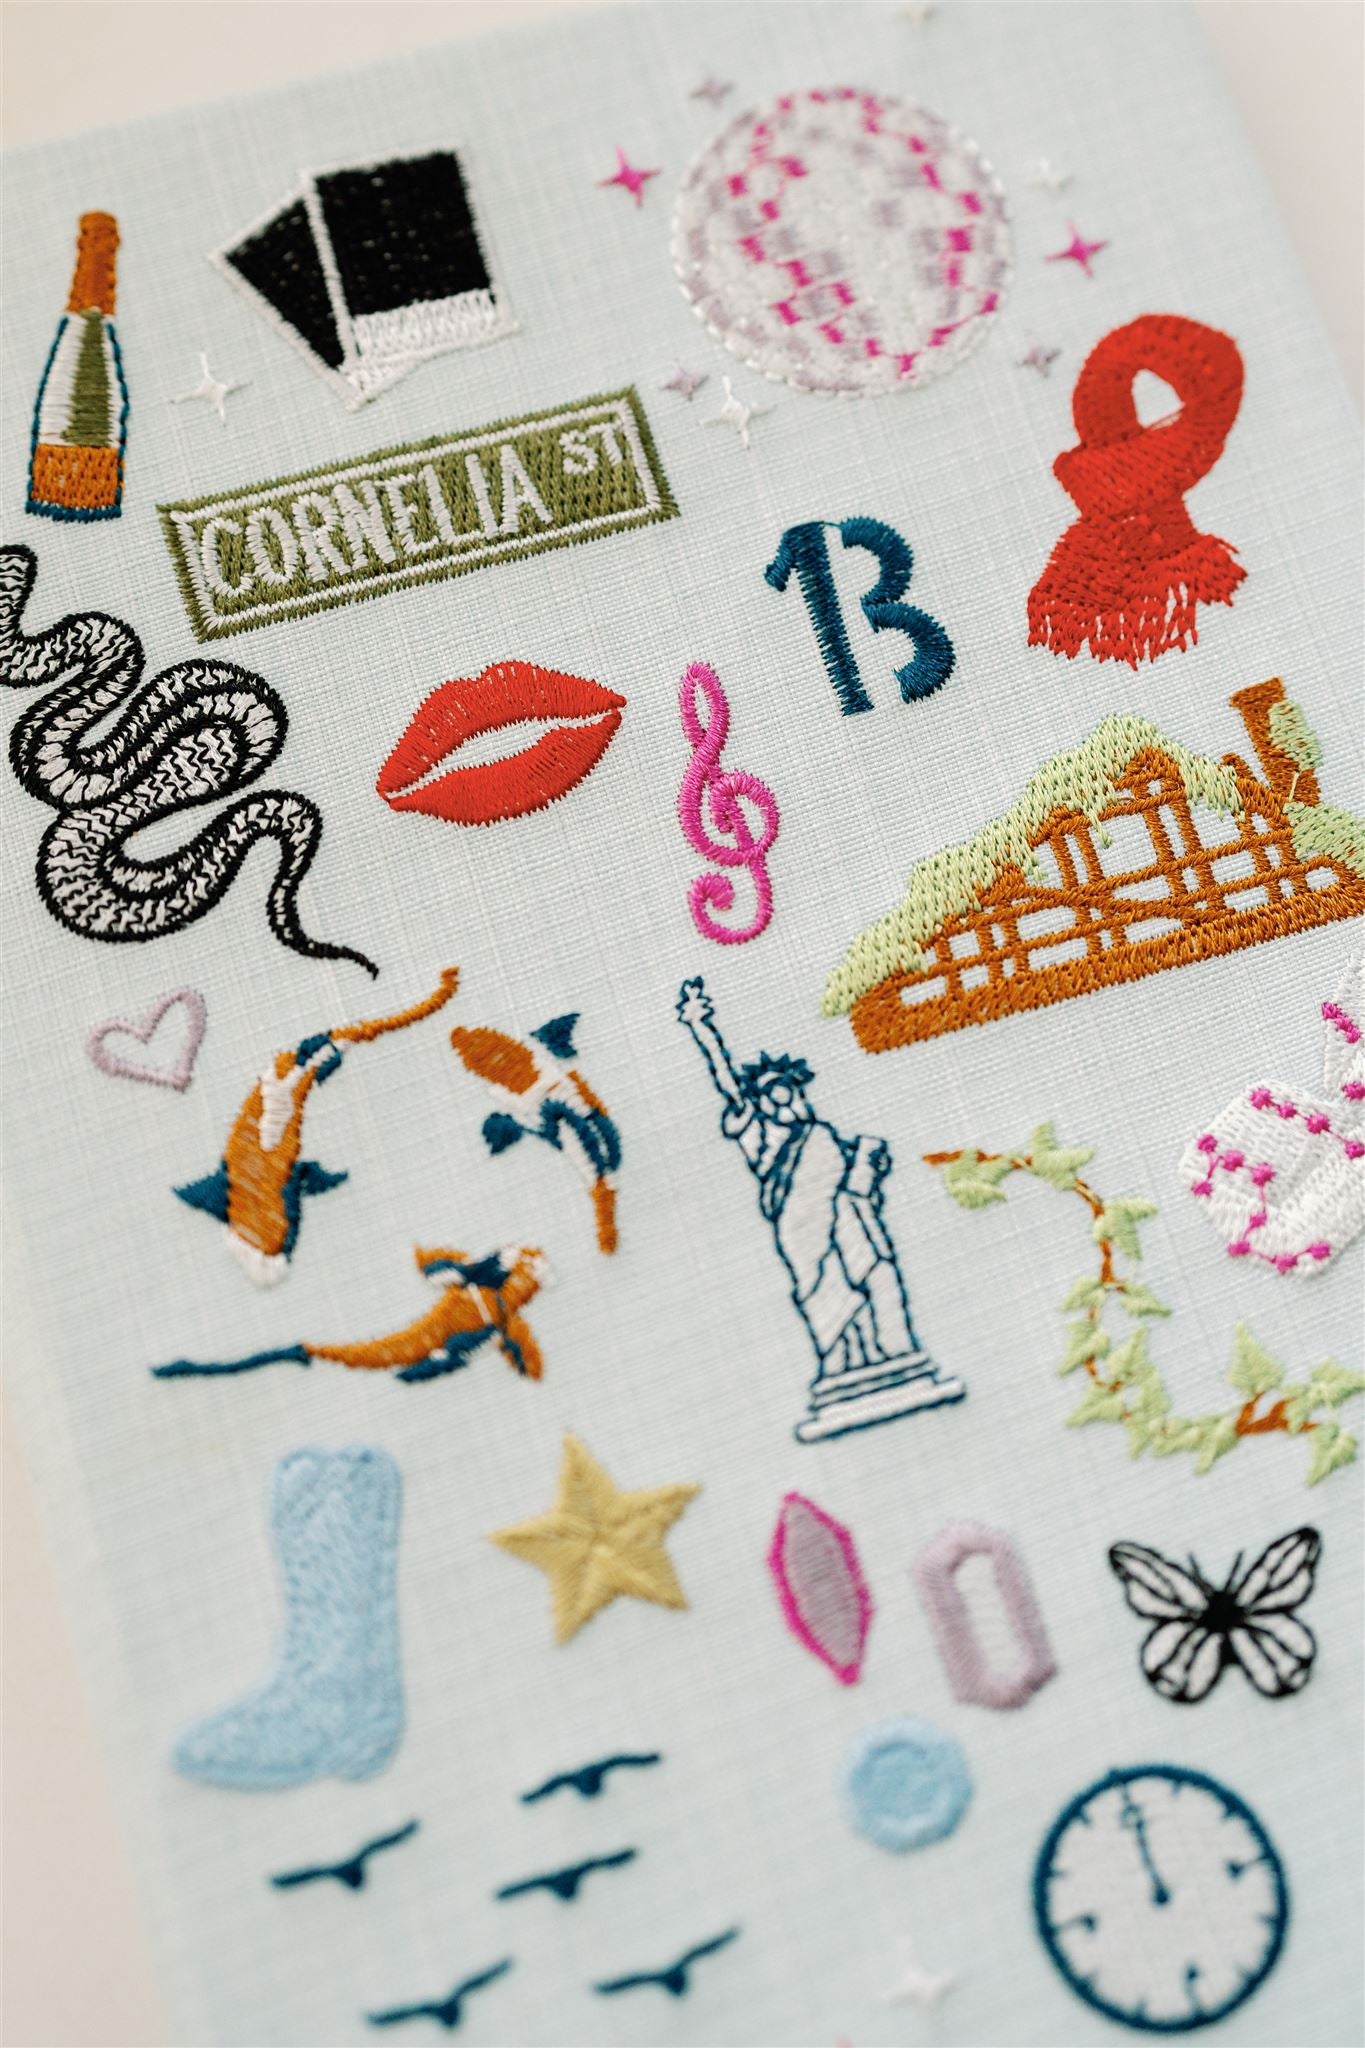 Embroidered Taylor Swift Hardcover Notebook